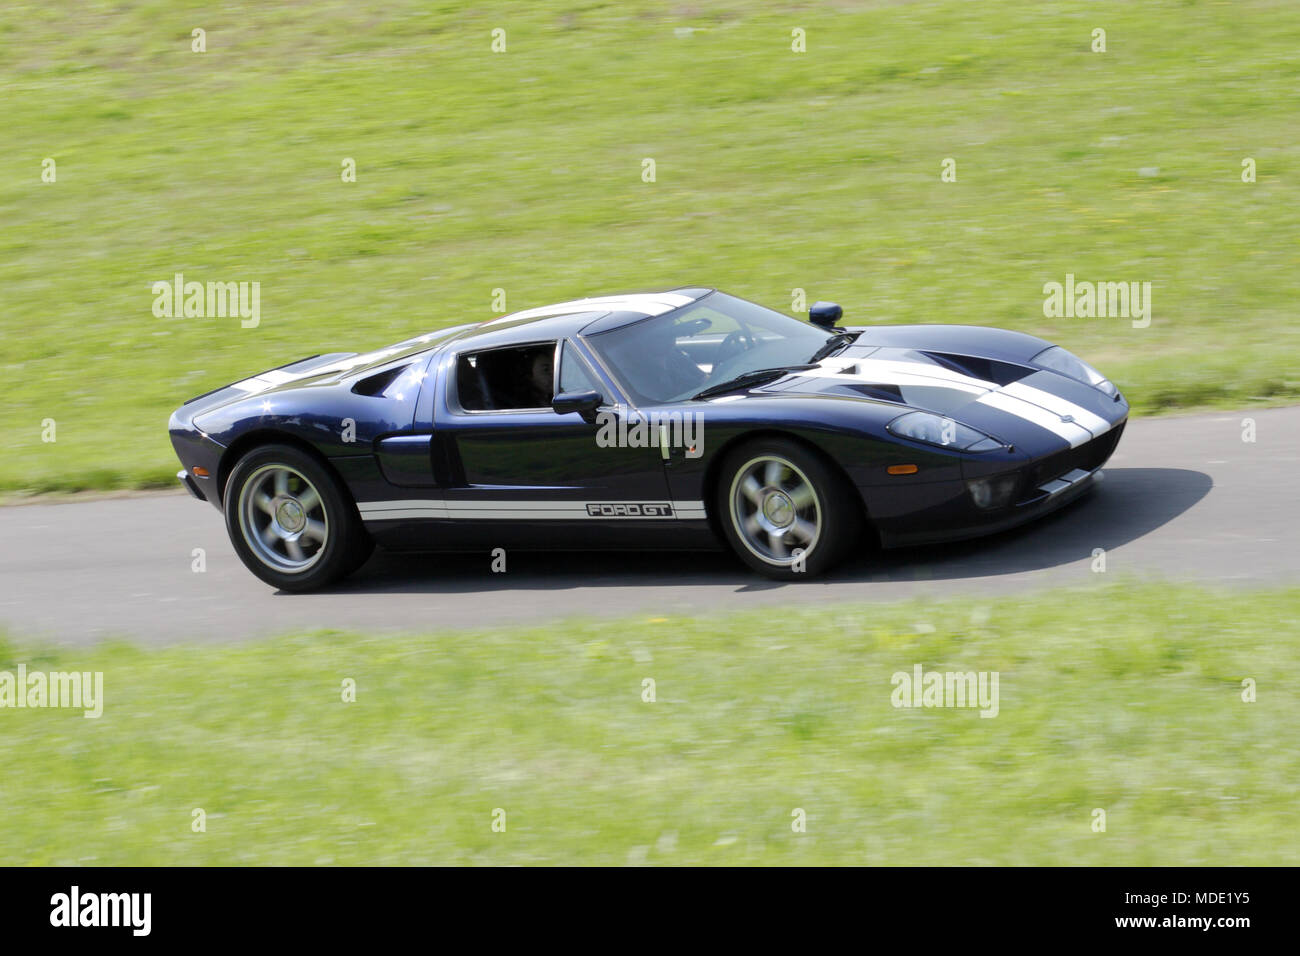 Ford GT super car hyper-car driving fast Stock Photo